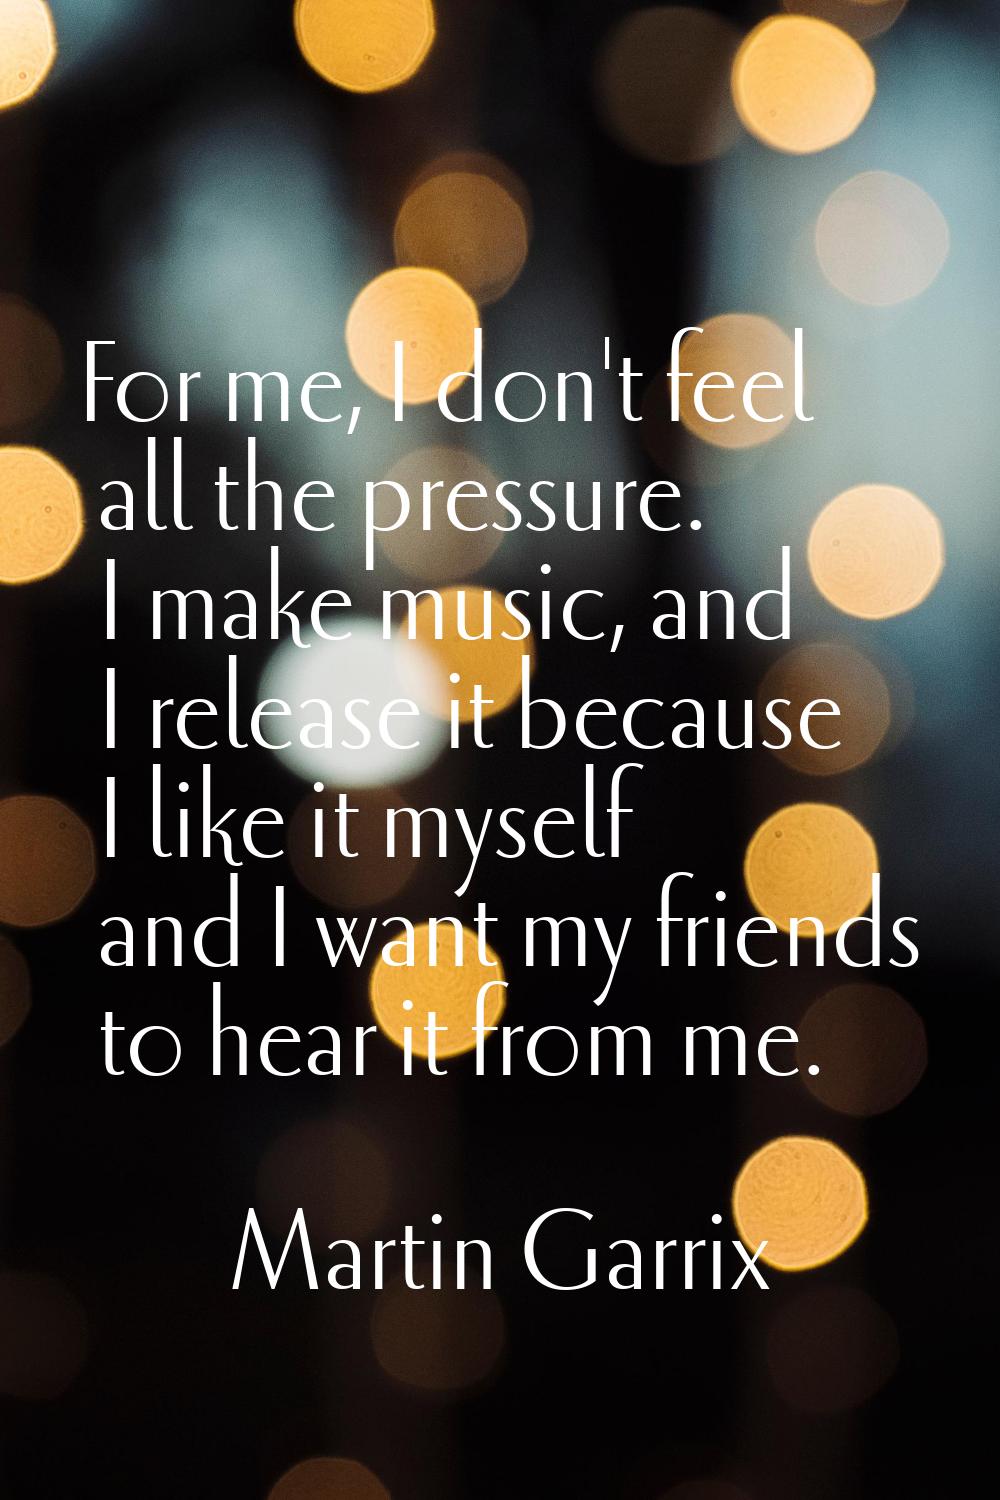 For me, I don't feel all the pressure. I make music, and I release it because I like it myself and 